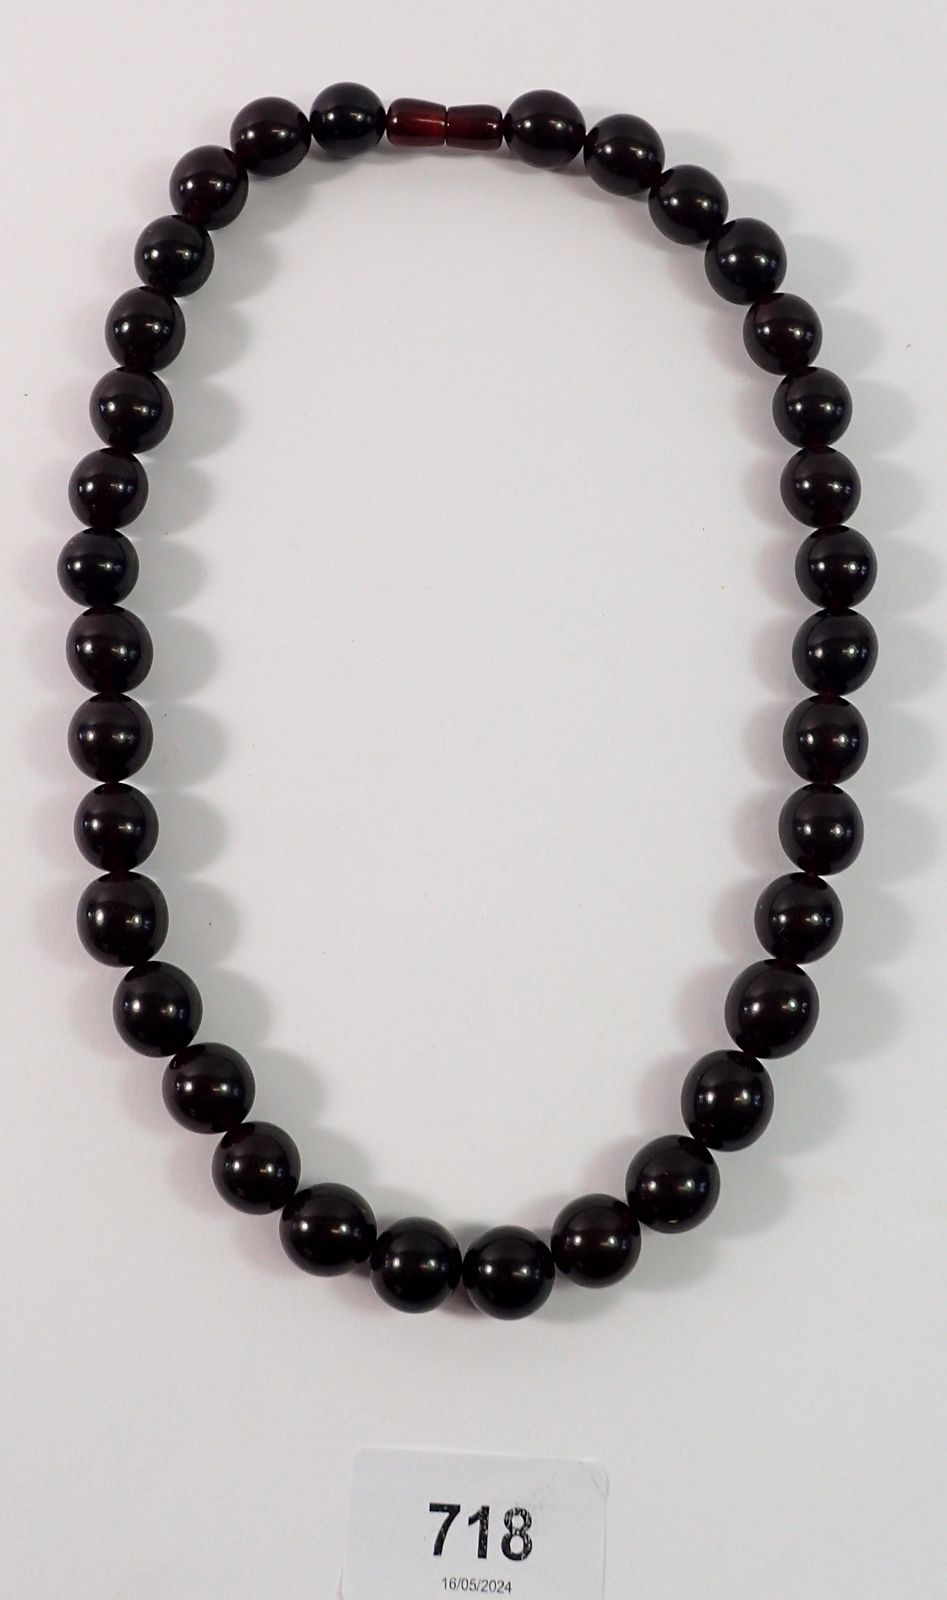 A cherry amber bead necklace, 50cm long, 57g